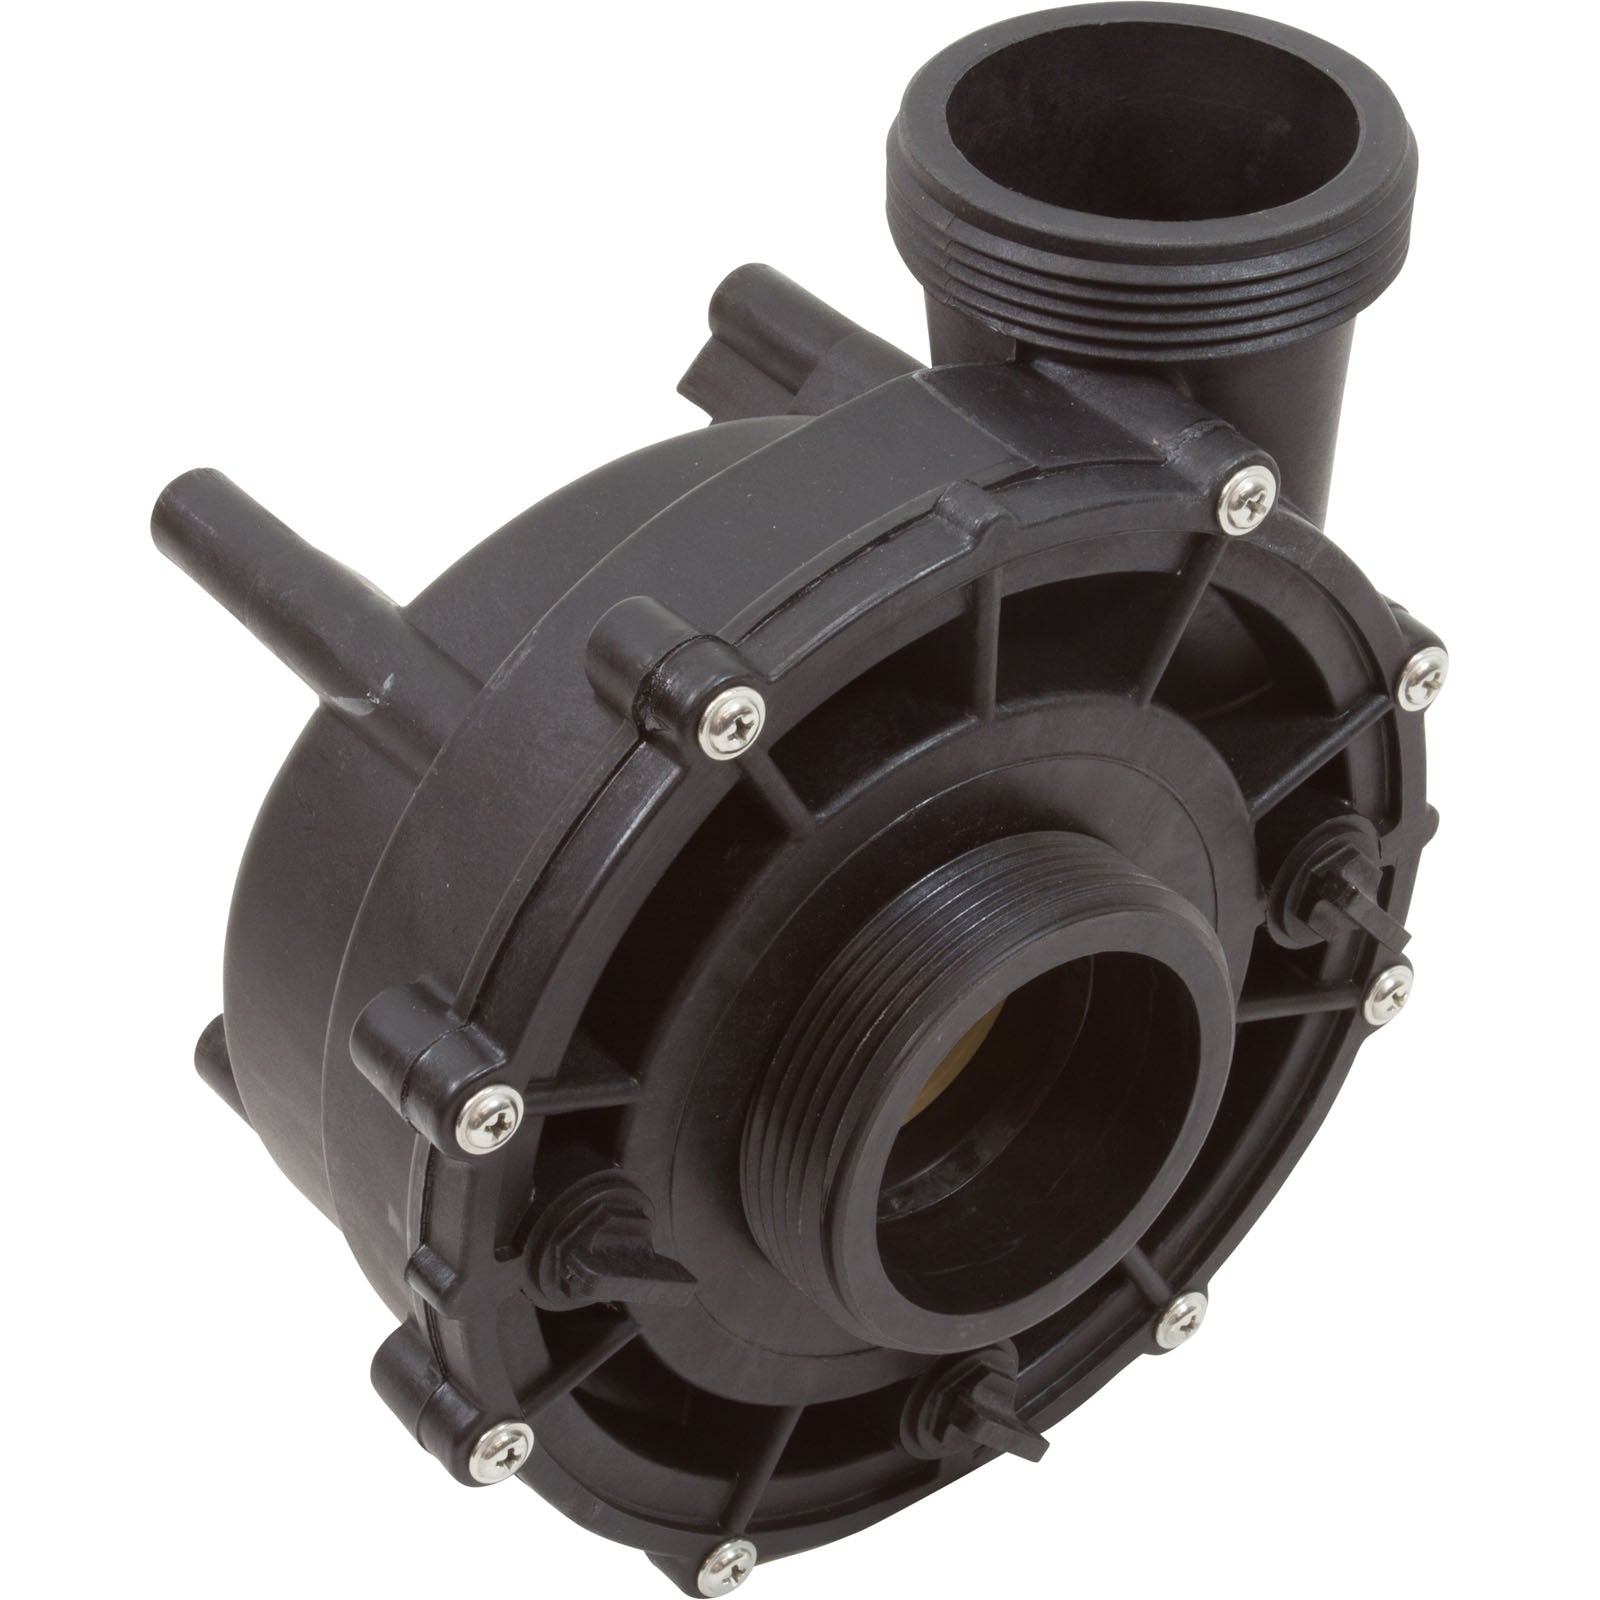 Energy Savers  Wetend, LX Pump ONLY, 56WUA400, 4.0HP, SD, 2"MBT